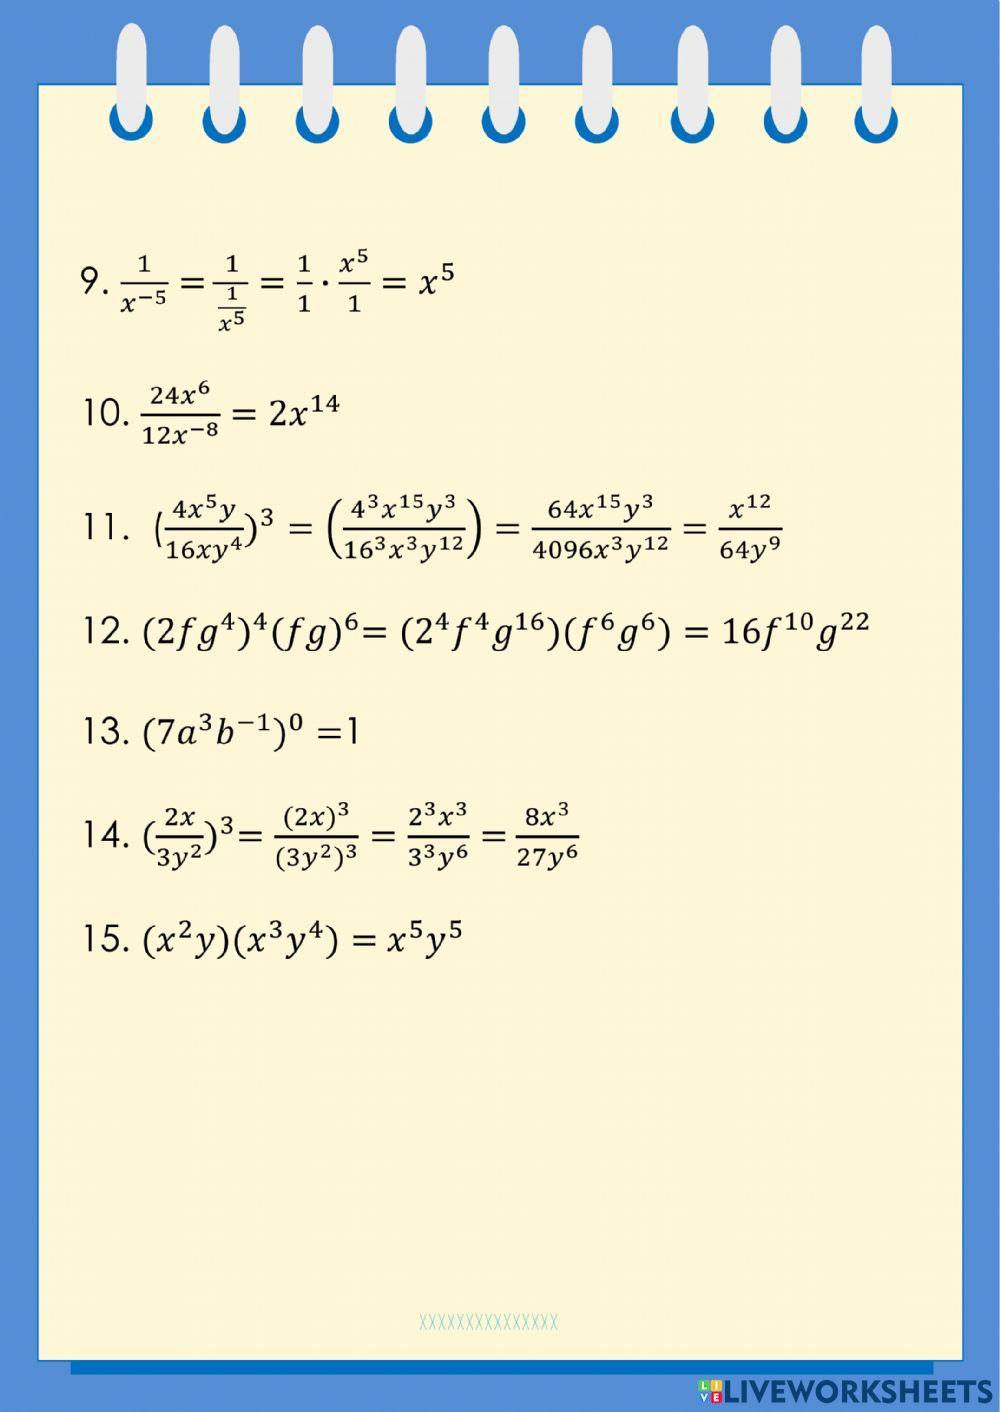 Laws of Exponents 2